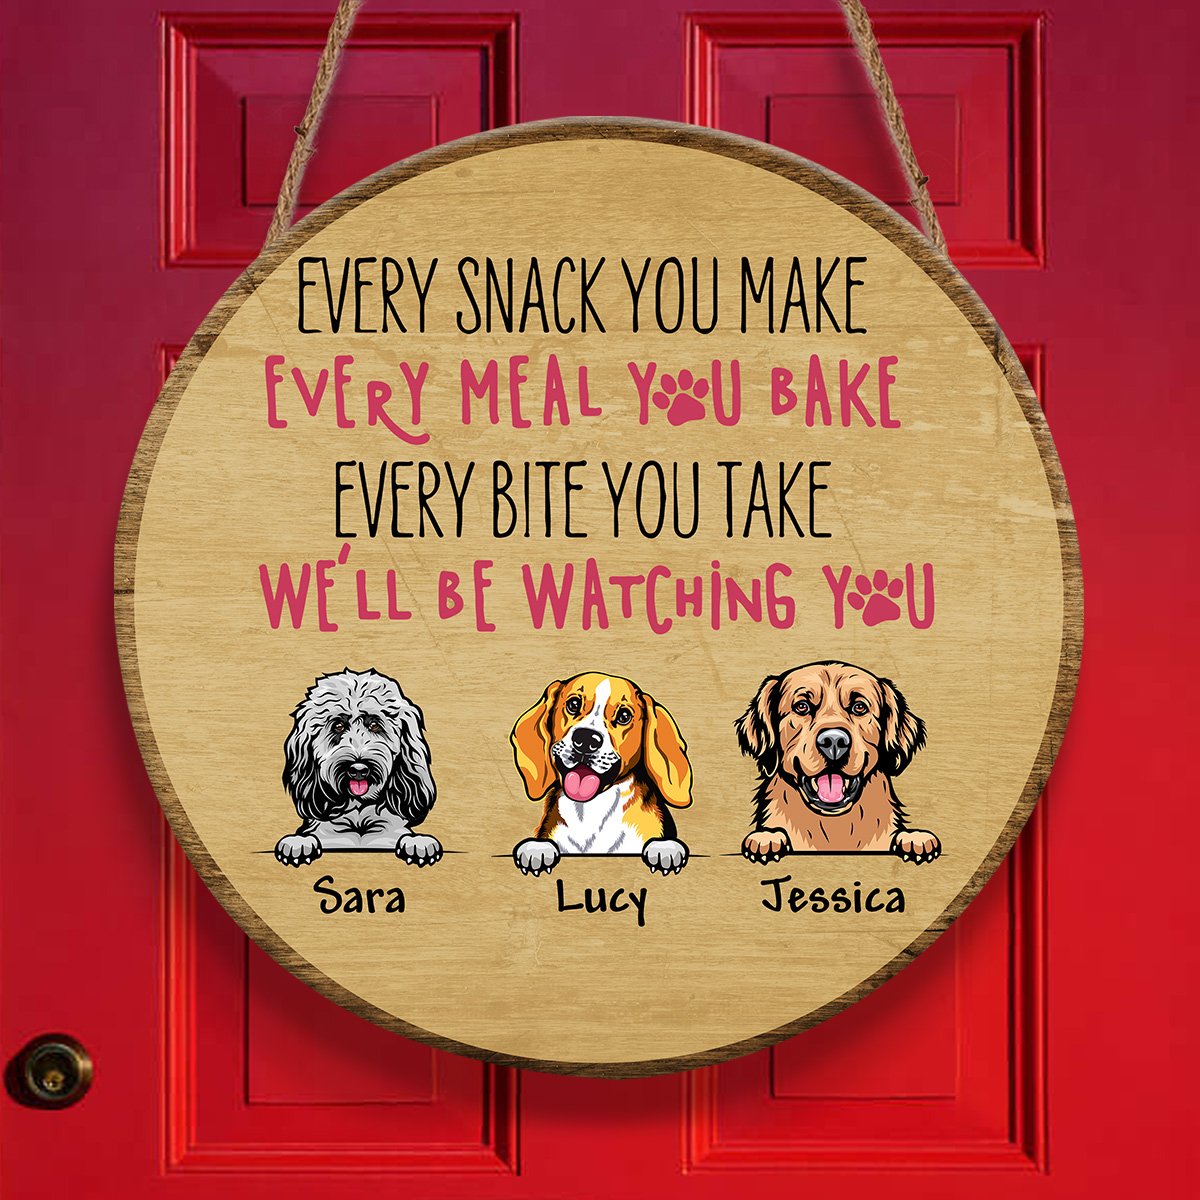 I'll Be Watching You Door Sign Personalizedwitch Personalized Round Wood Sign Outdoor Decor